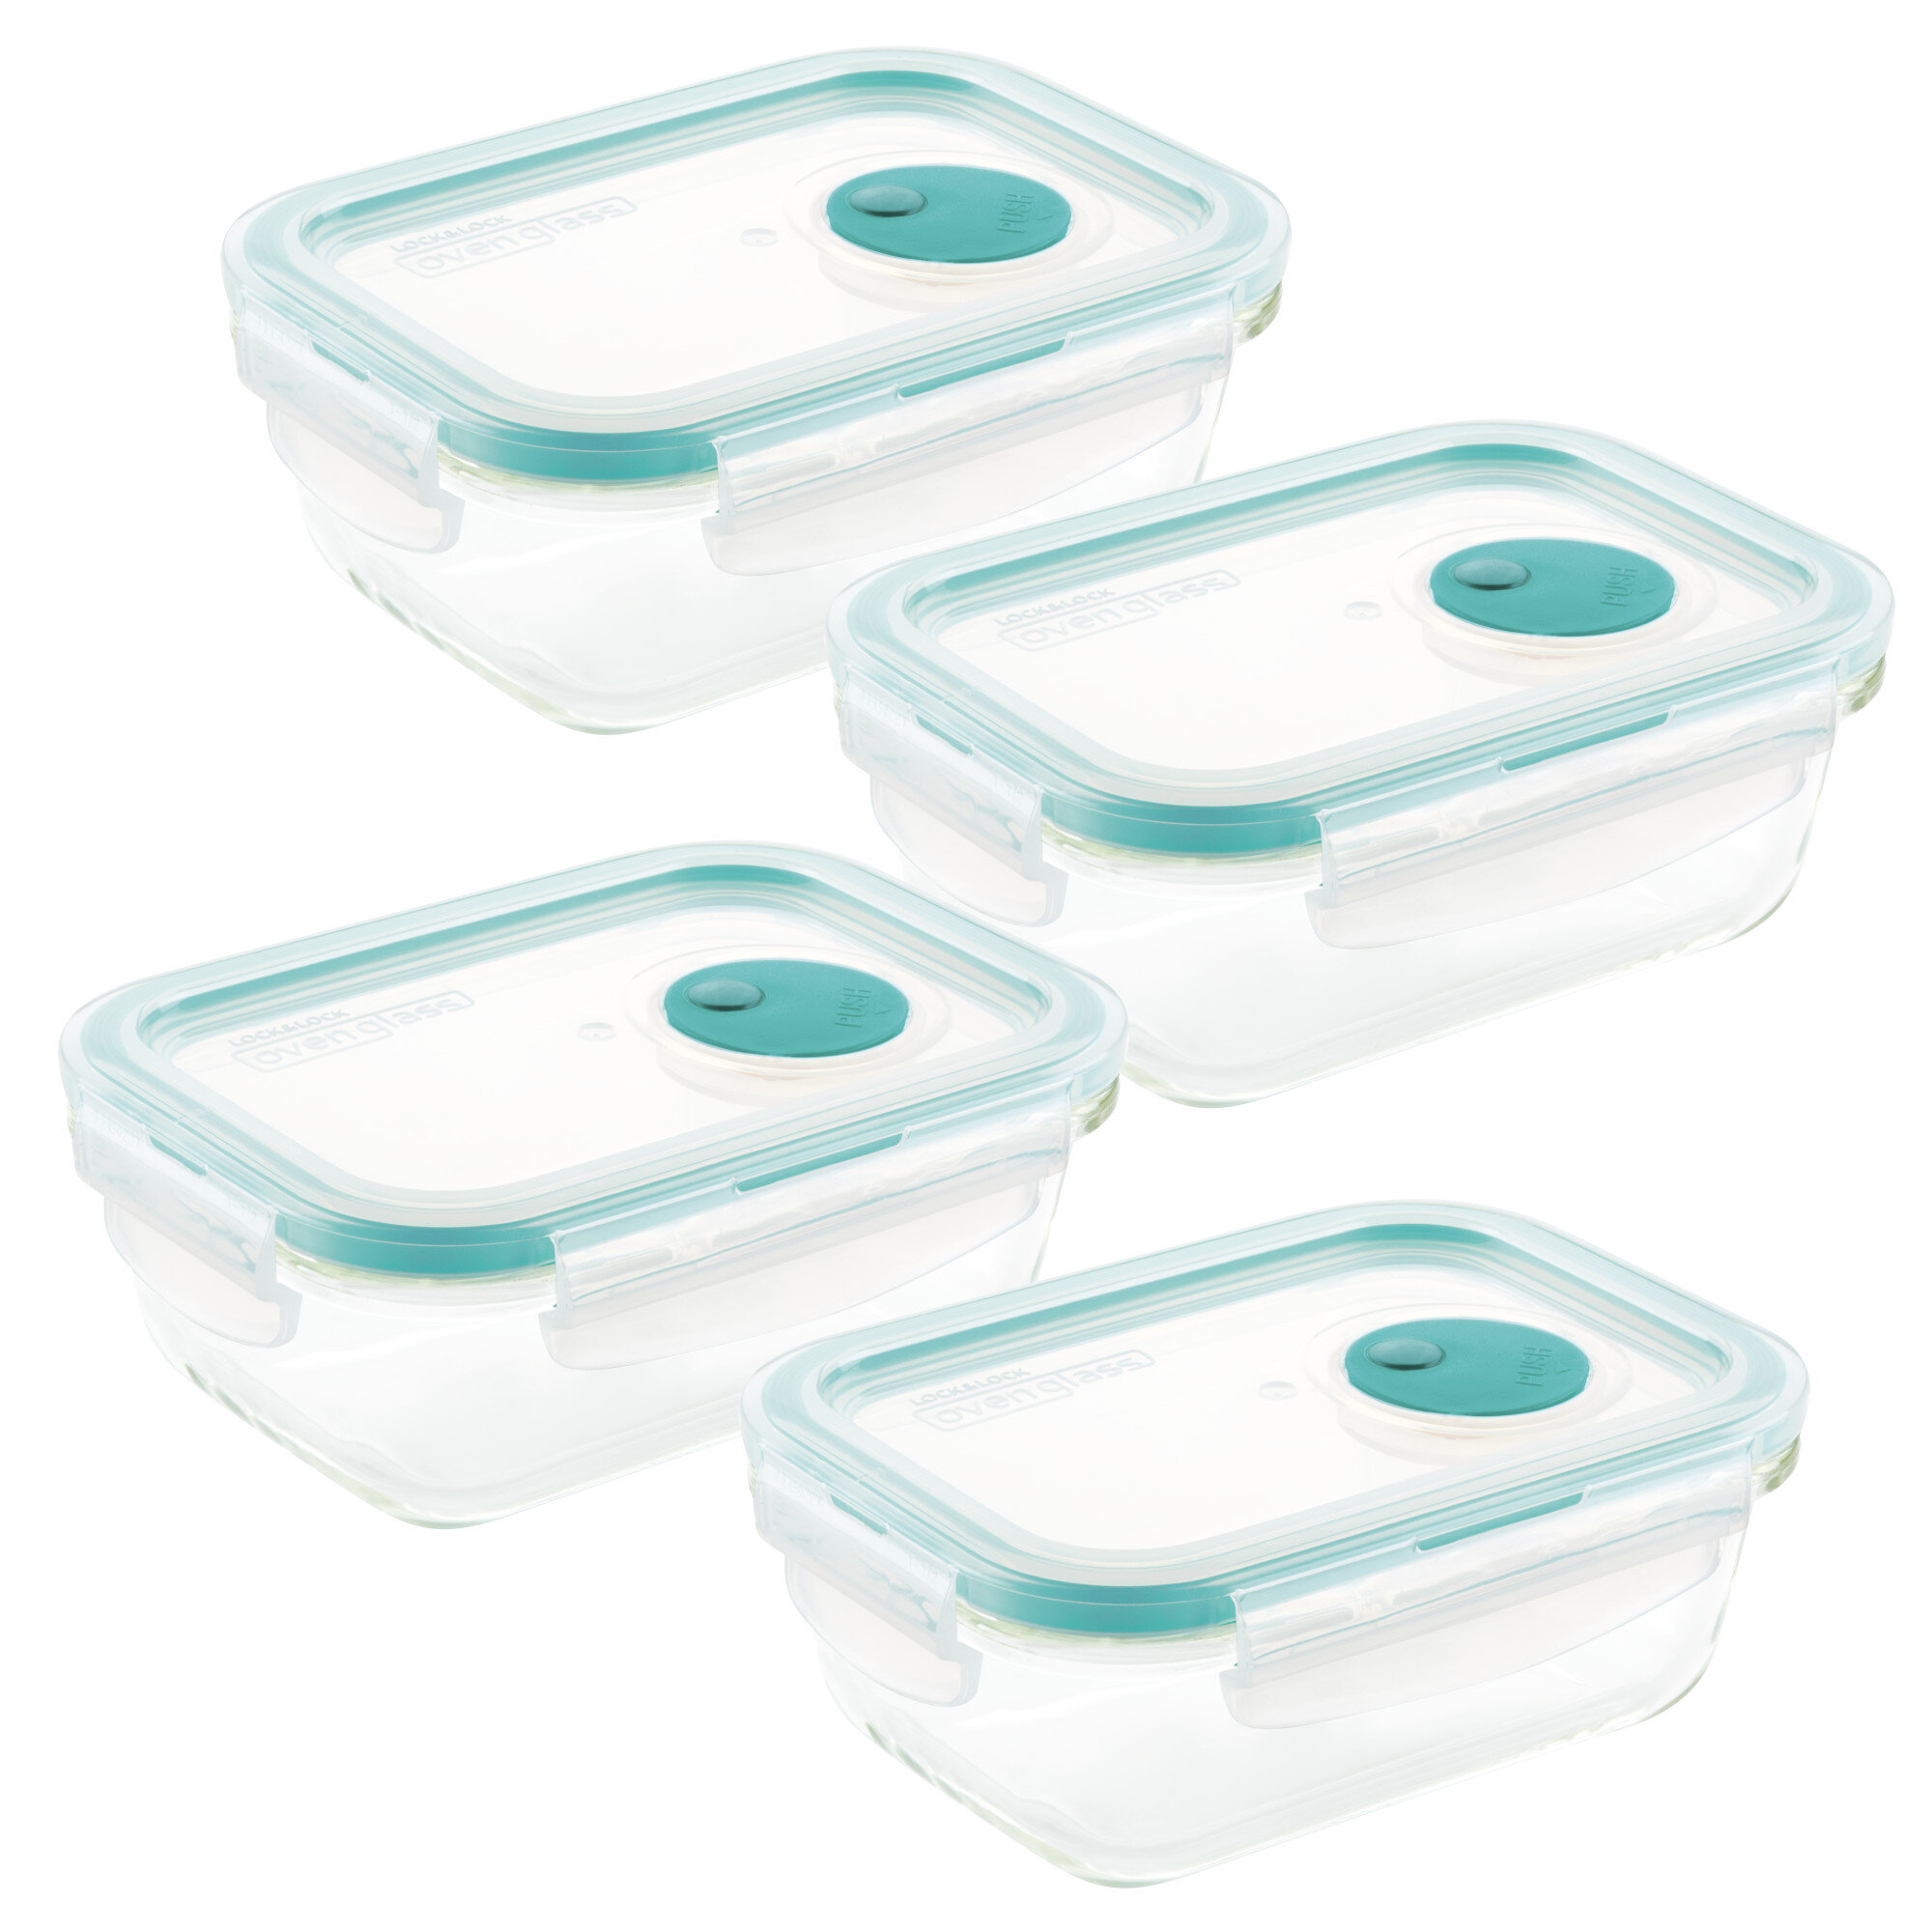 Lock & Lock Purely Better Vented Glass Food Storage Container, 47-Ounce, Clear